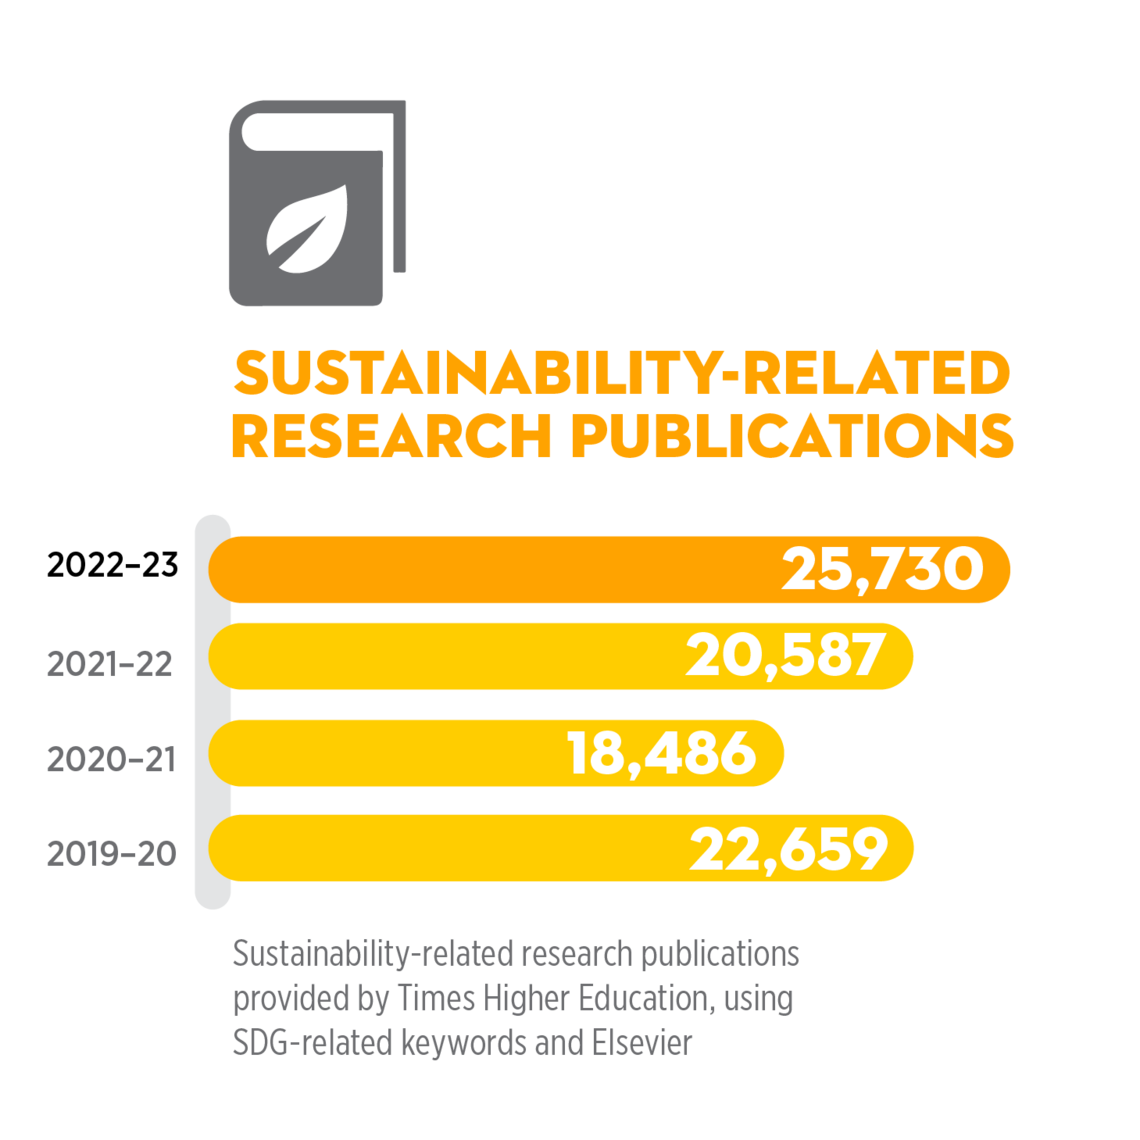 over 25,000 sustainability-related research publications in 2022-23